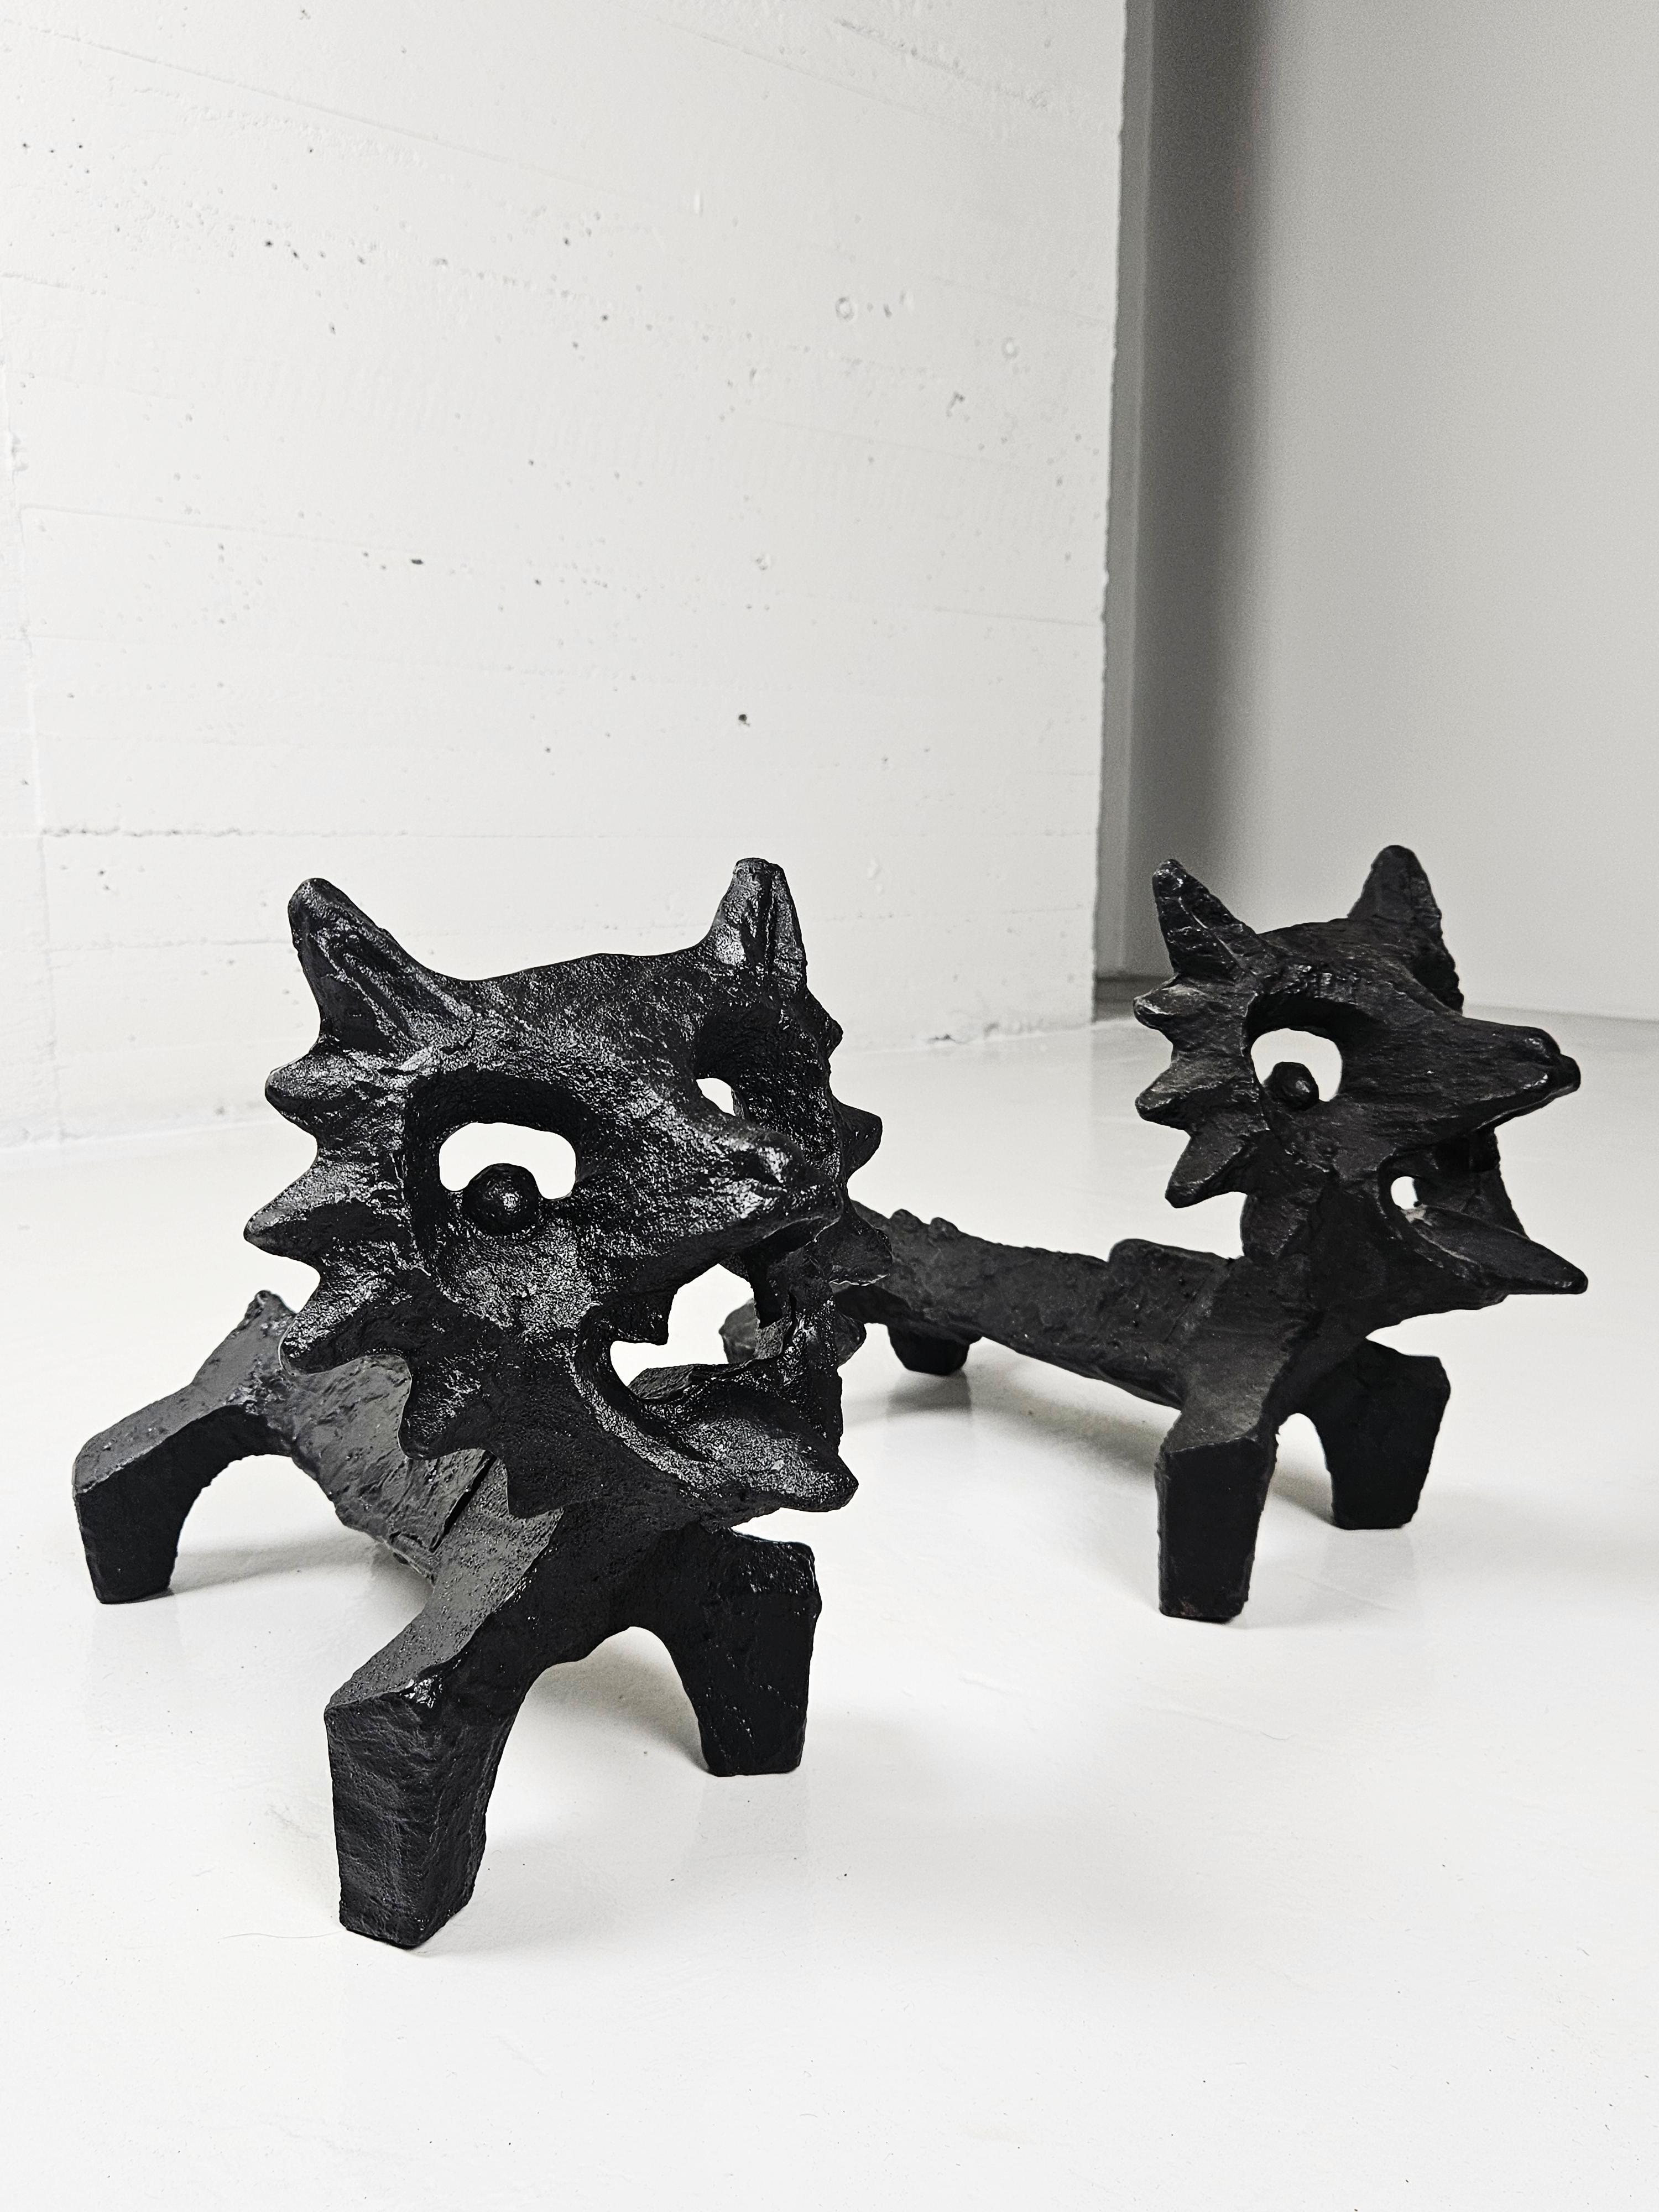 Big sculptural andiron 'The Fox' designed by Olle Hermansson and manufactured by Husqvarna, Sweden, in the middle of the 20th century.

This piece has never been used as an andiron but as a decorative object by the original owner since the 1960s. 